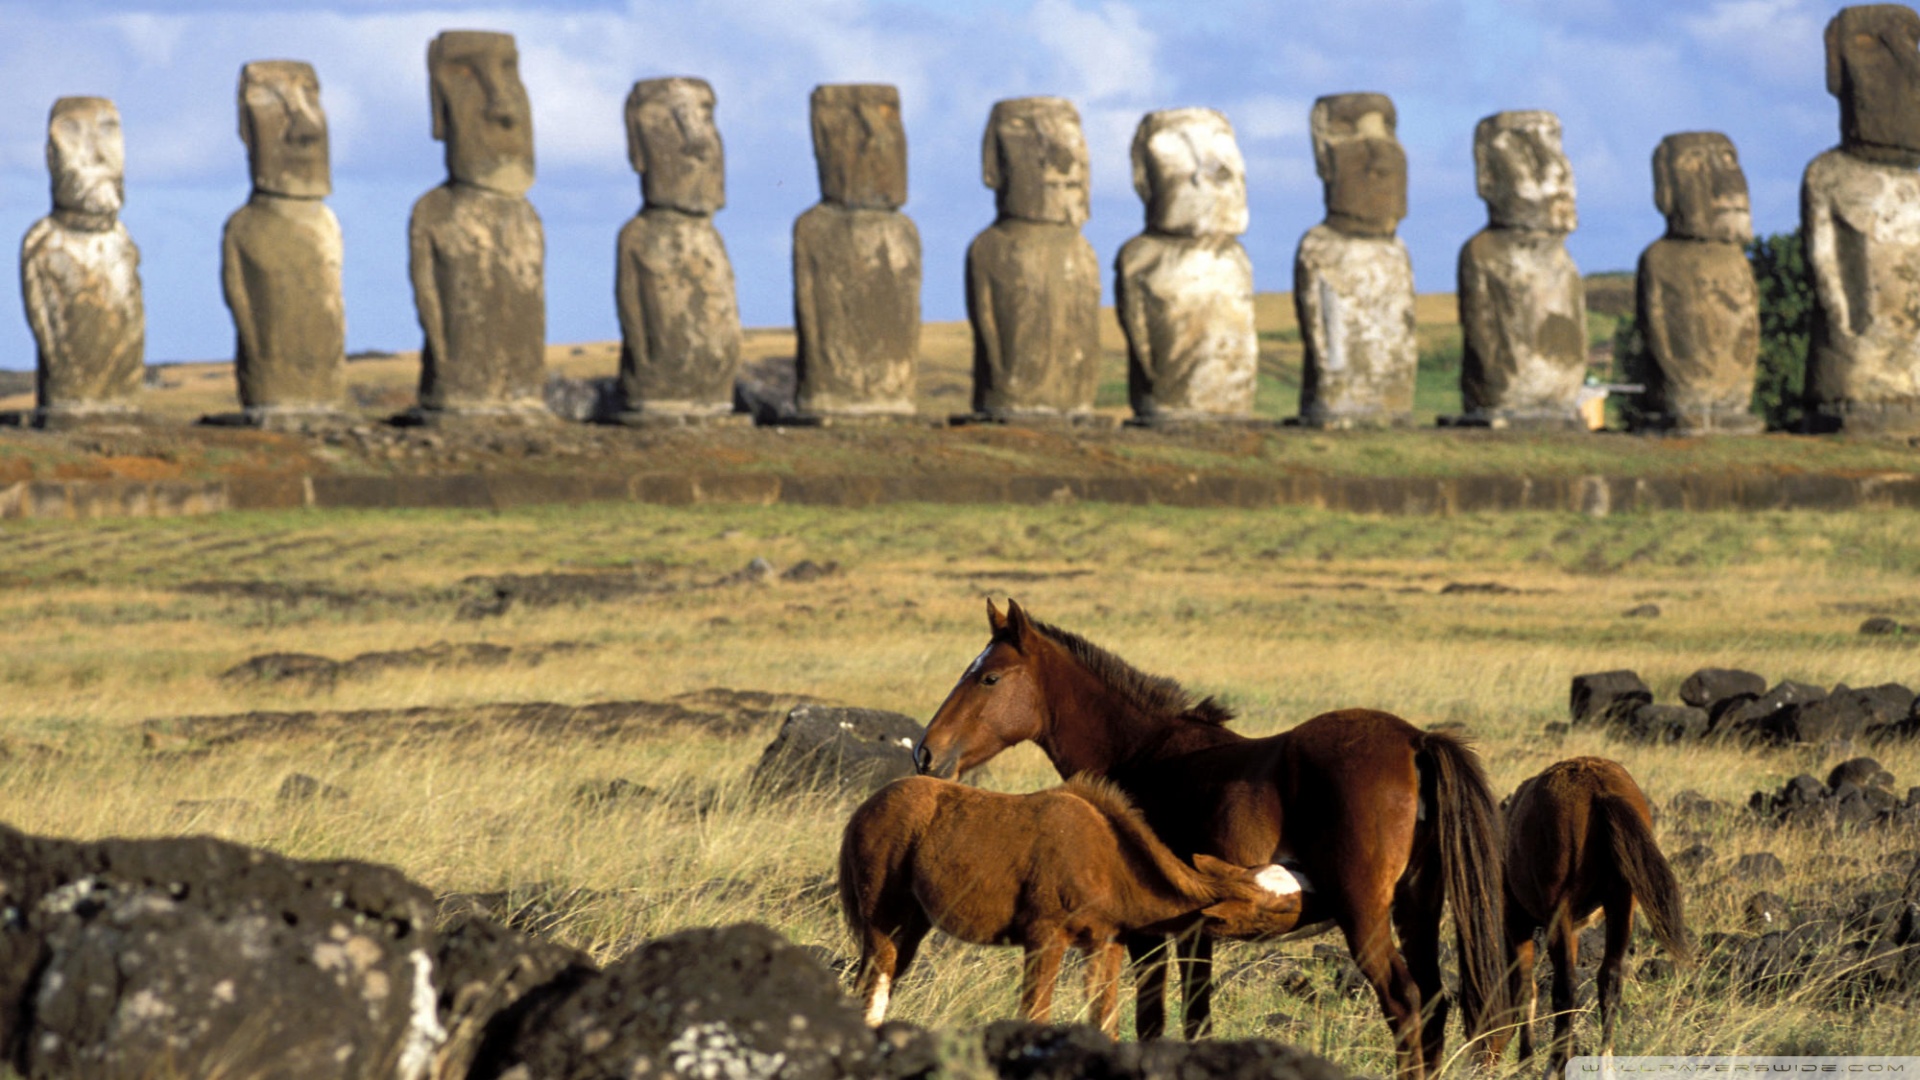  Easter Island Chile Wallpaper 1920x1080 Horses Of Easter Island 1920x1080